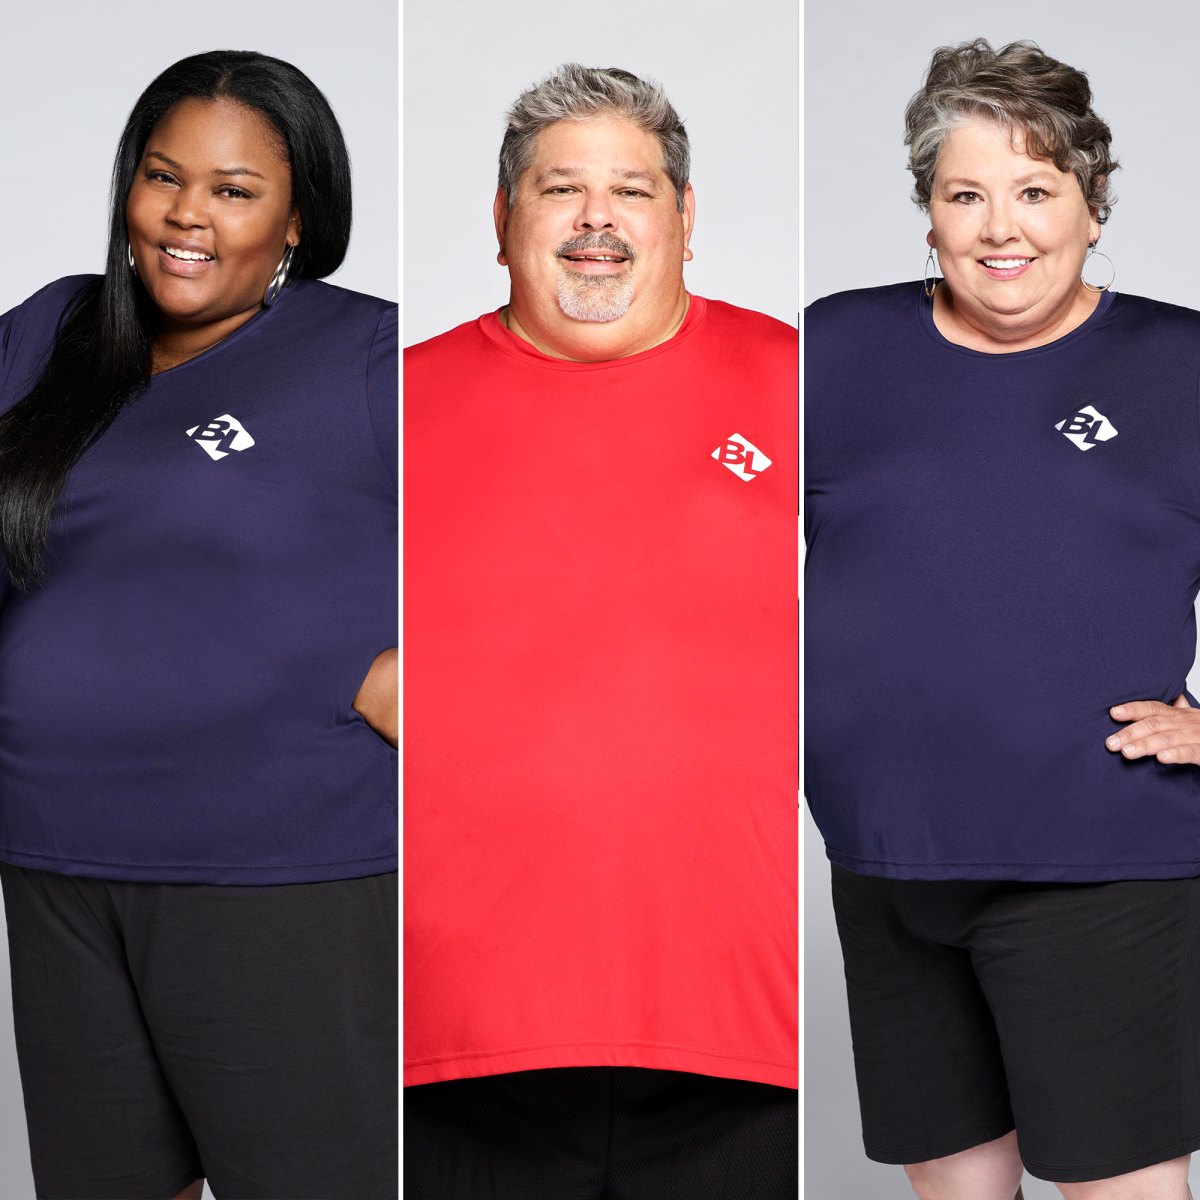 'The Biggest Loser’ Cast See Before, After Pictures